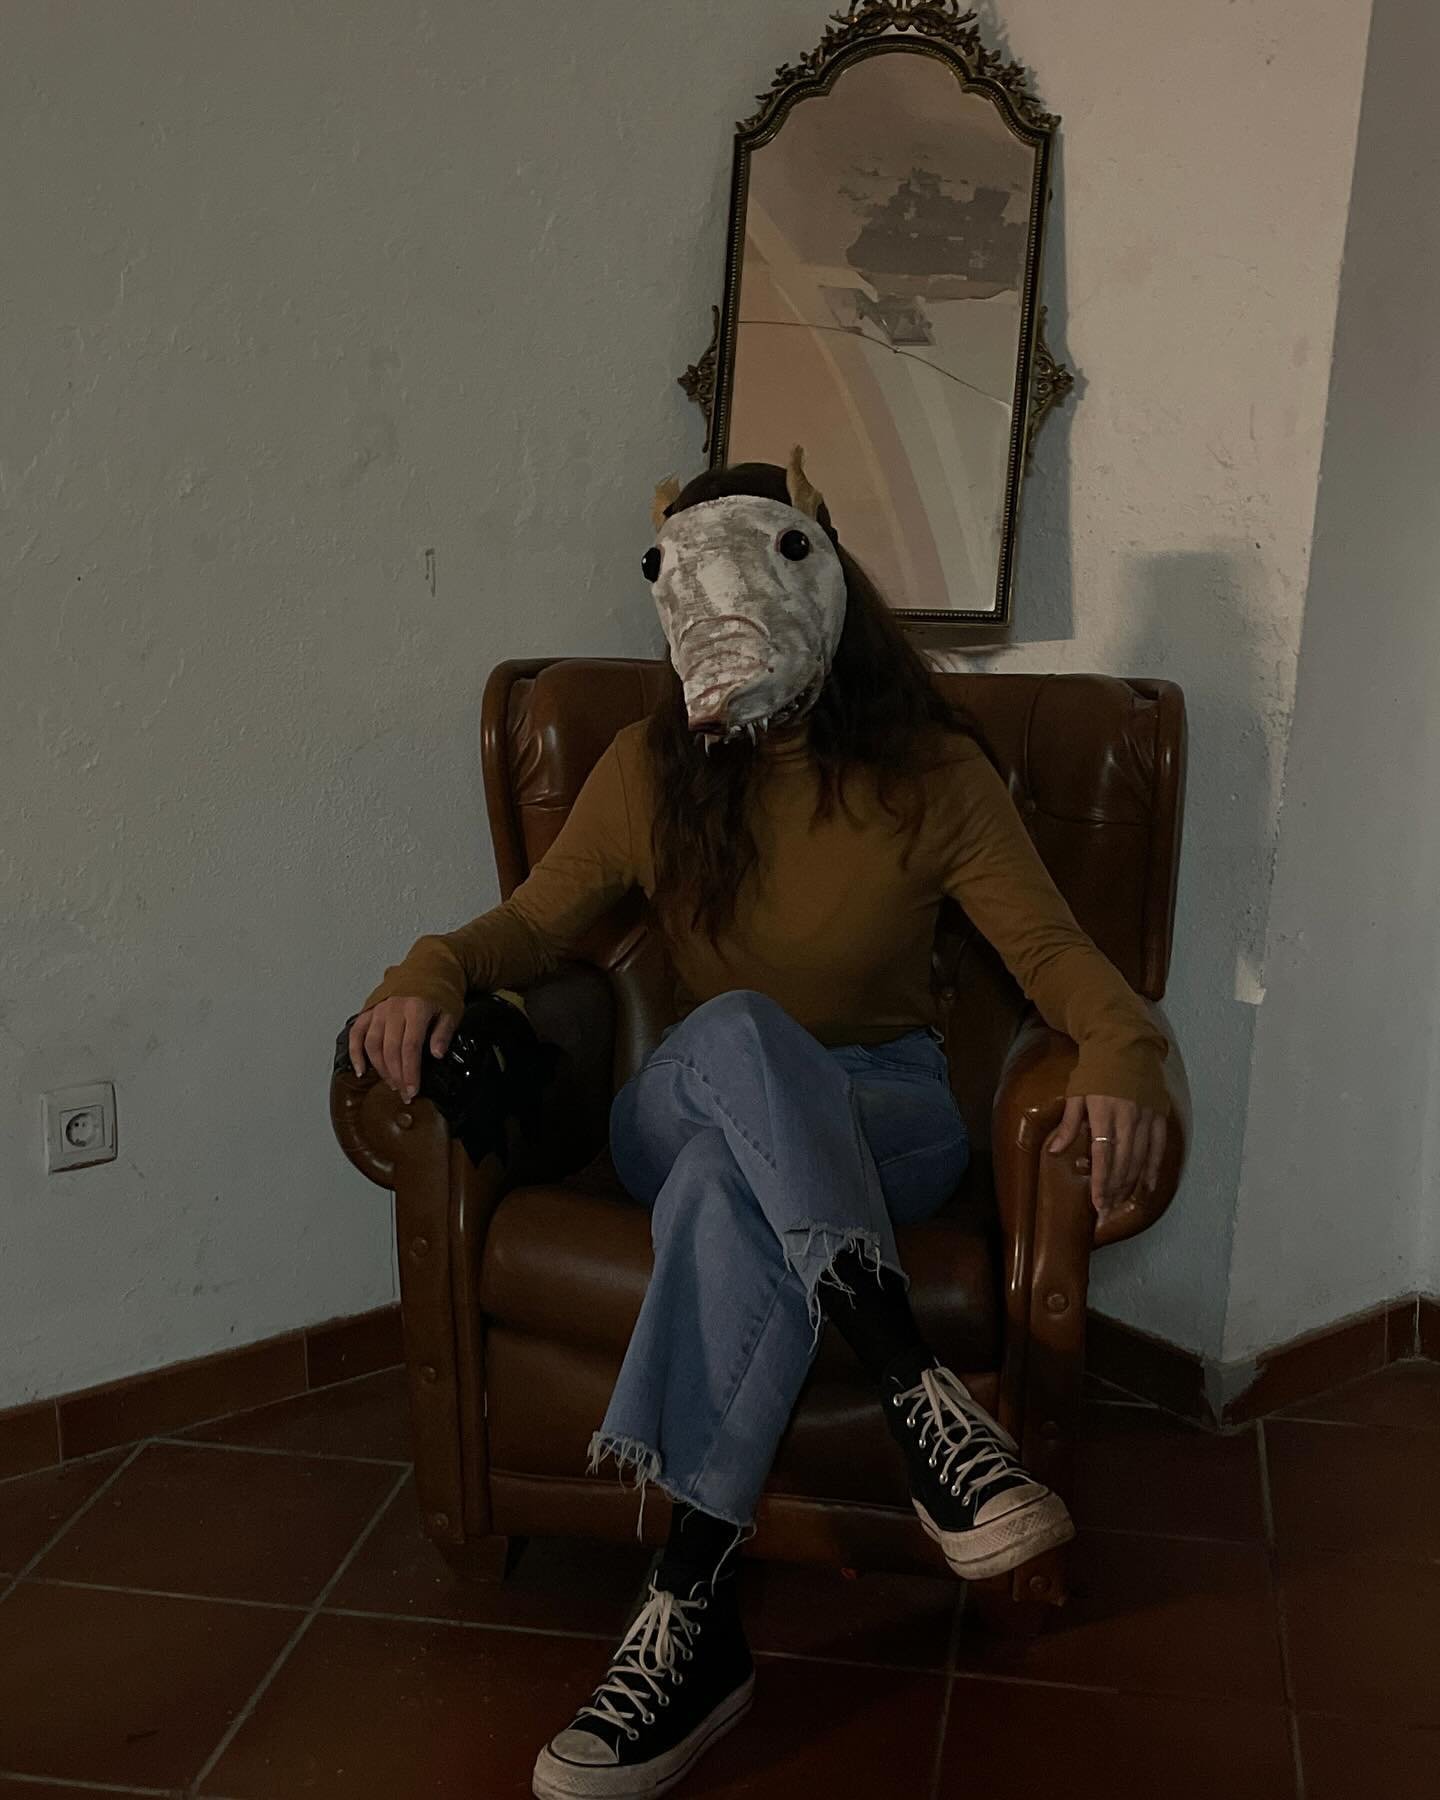 Pig wants to bum a smoke. Do you have one for her?
@ana_patriarcaa @crookedcrowmasks #crookedcrowmasks #maskart